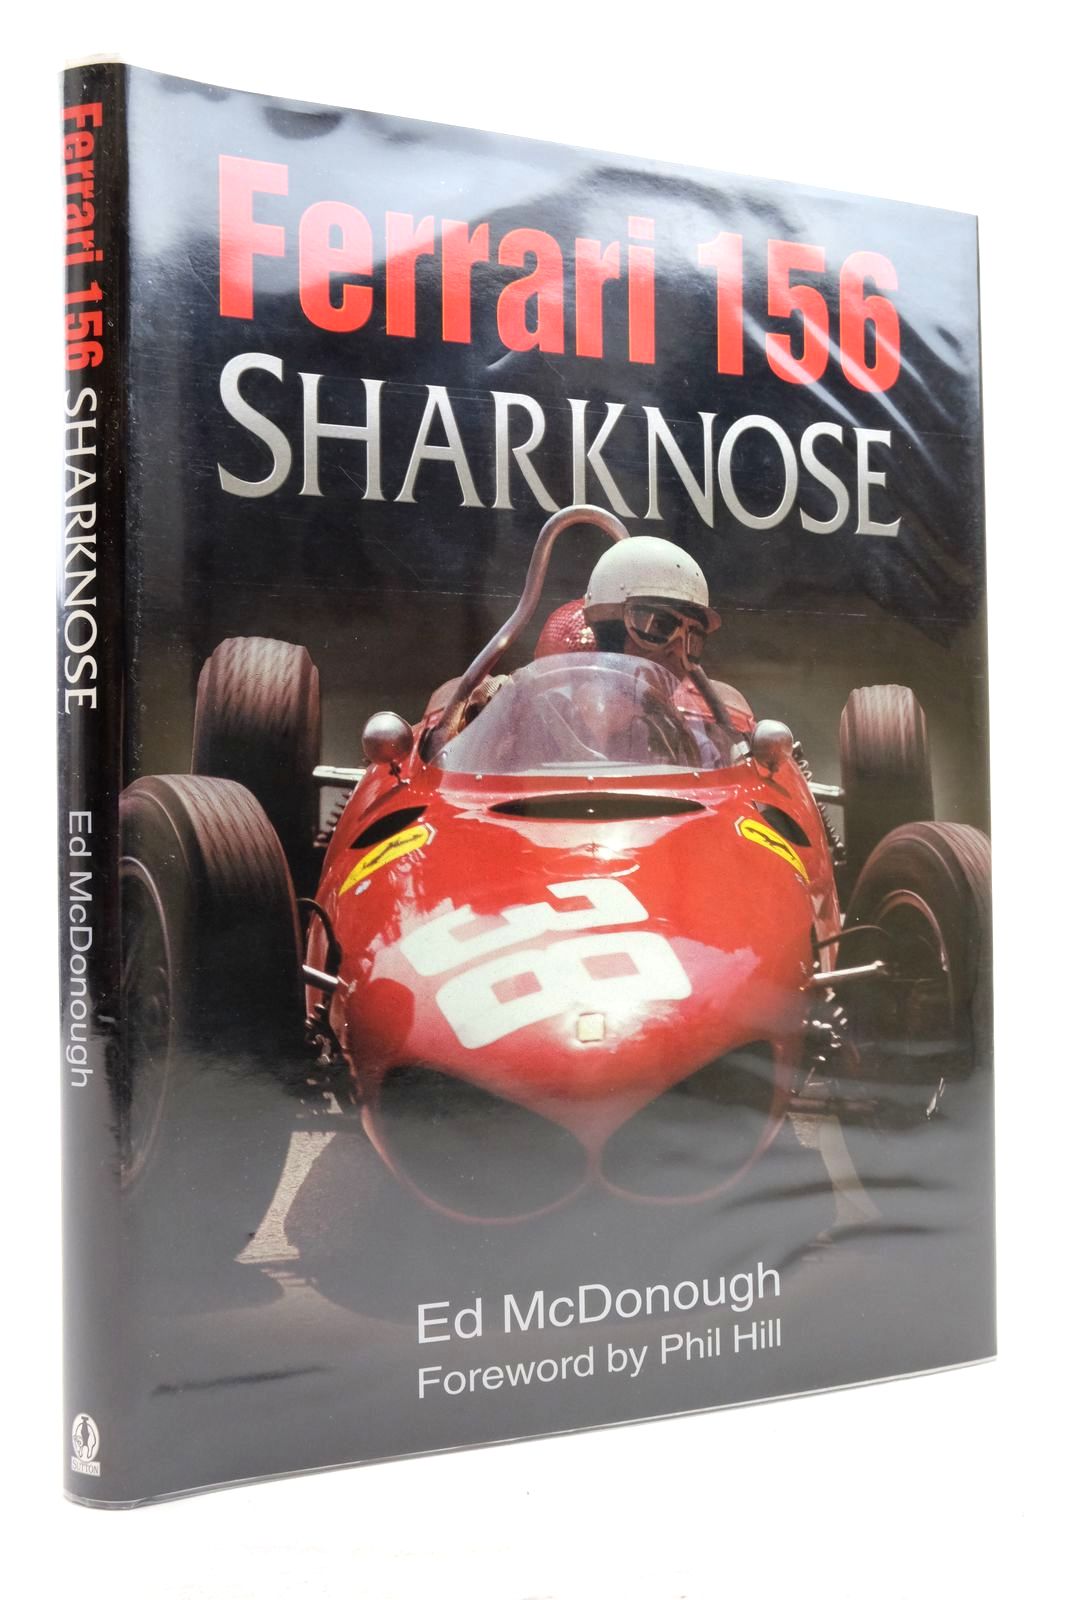 Photo of FERRARI 156 SHARKNOSE written by McDonough, Ed. Hill, Phil published by Sutton Publishing (STOCK CODE: 2137992)  for sale by Stella & Rose's Books